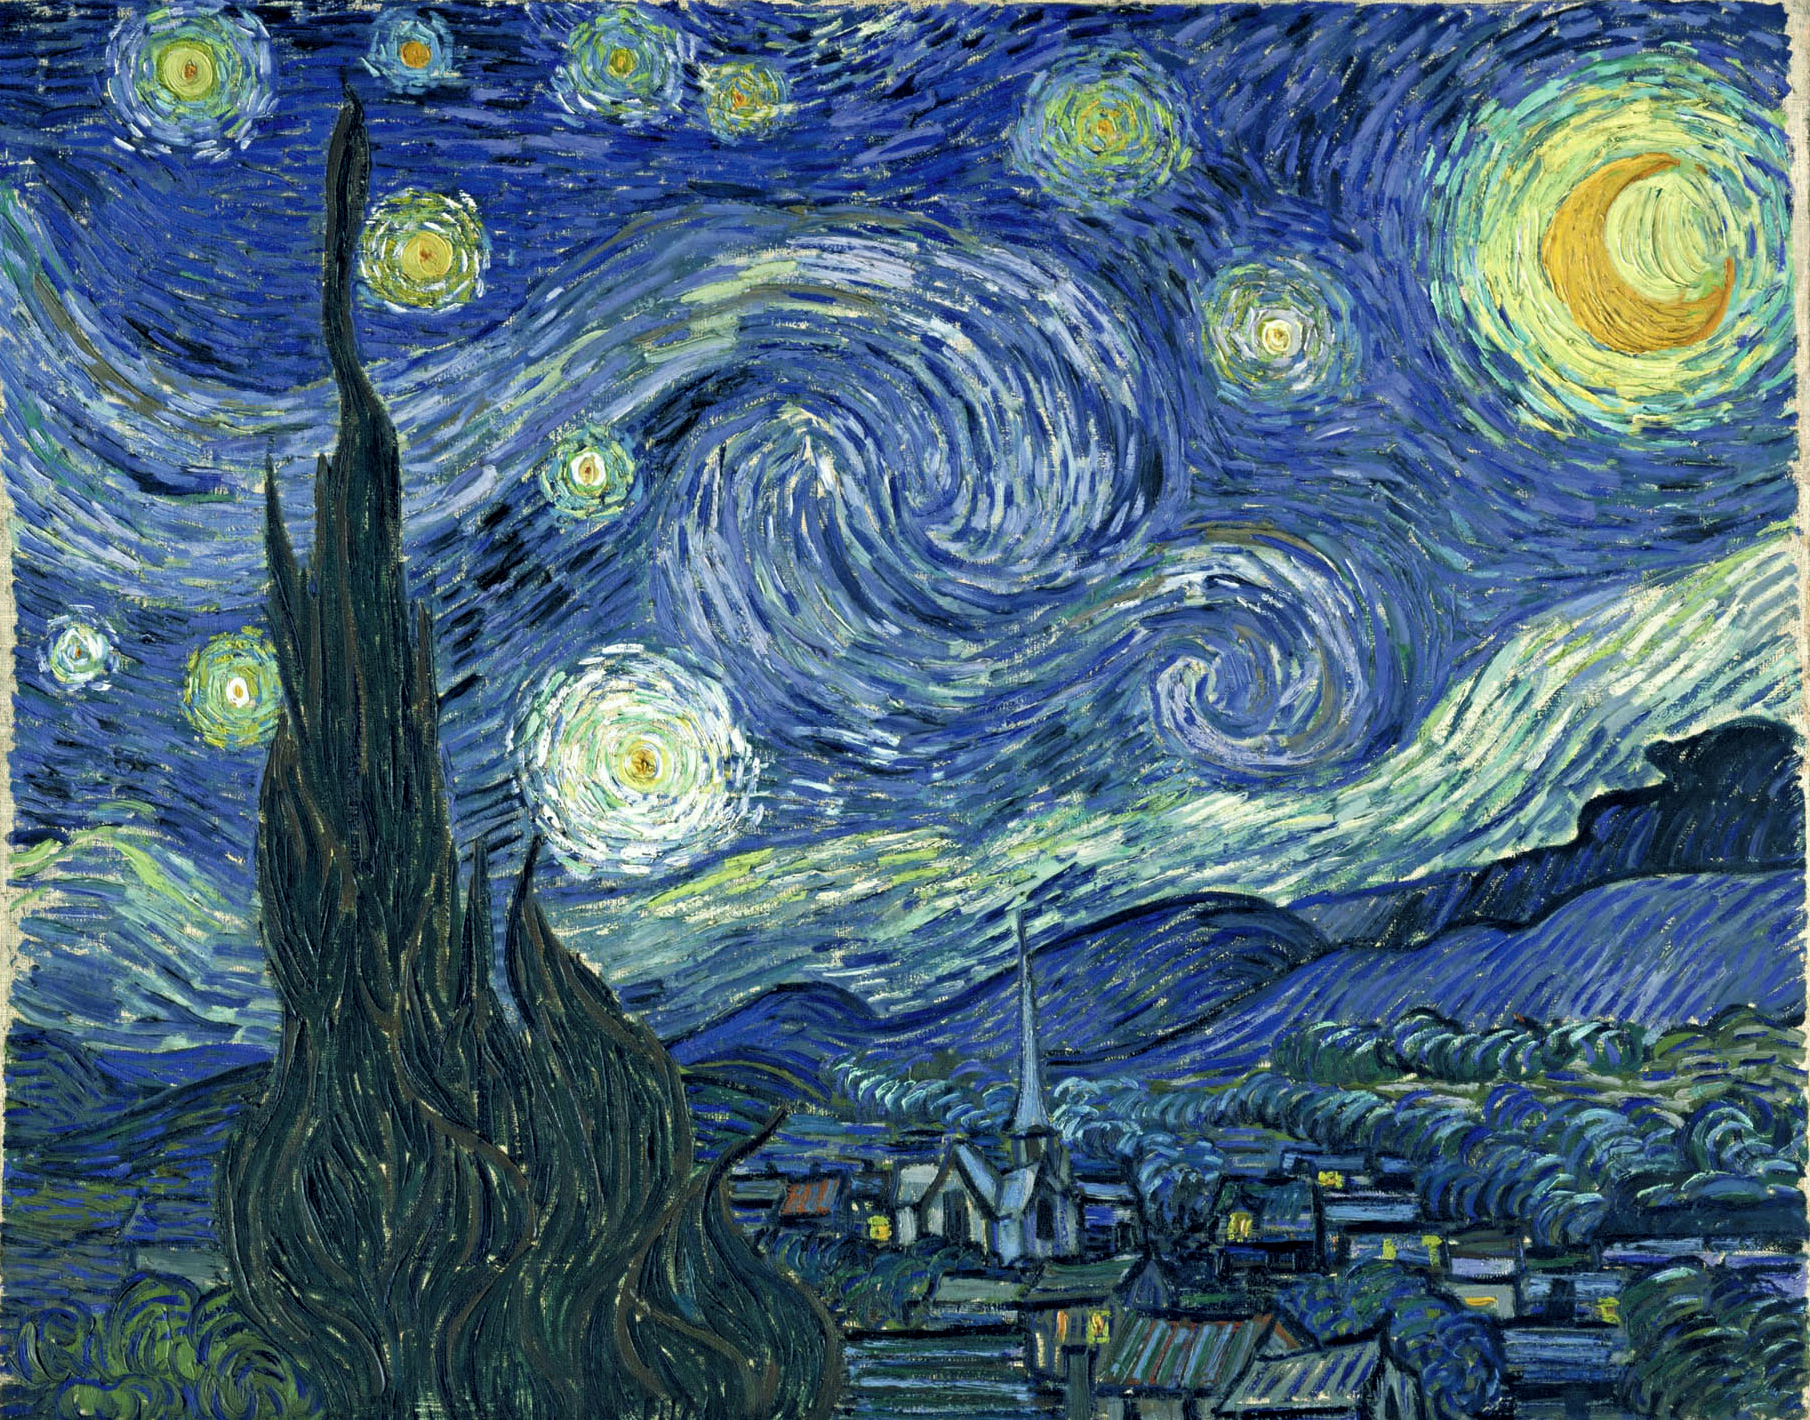 Vincent Van Gogh's iconic painting Starry Night - a mesmerizing, nocturnal masterpiece.